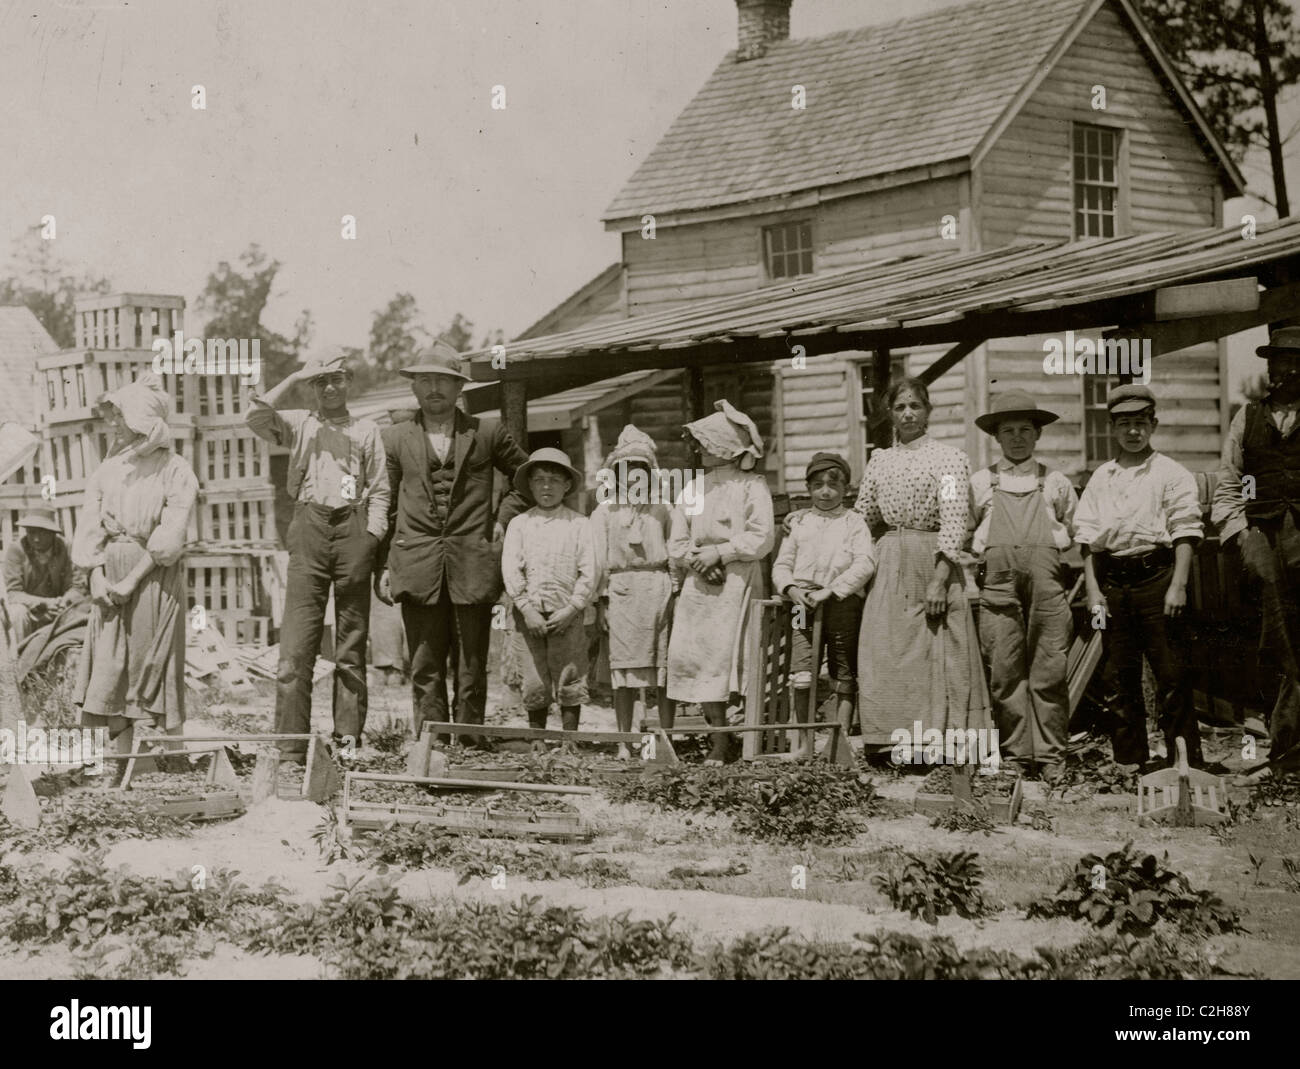 A group of berry pickers on Newton's Farm, Cannon, Delaware Stock Photo